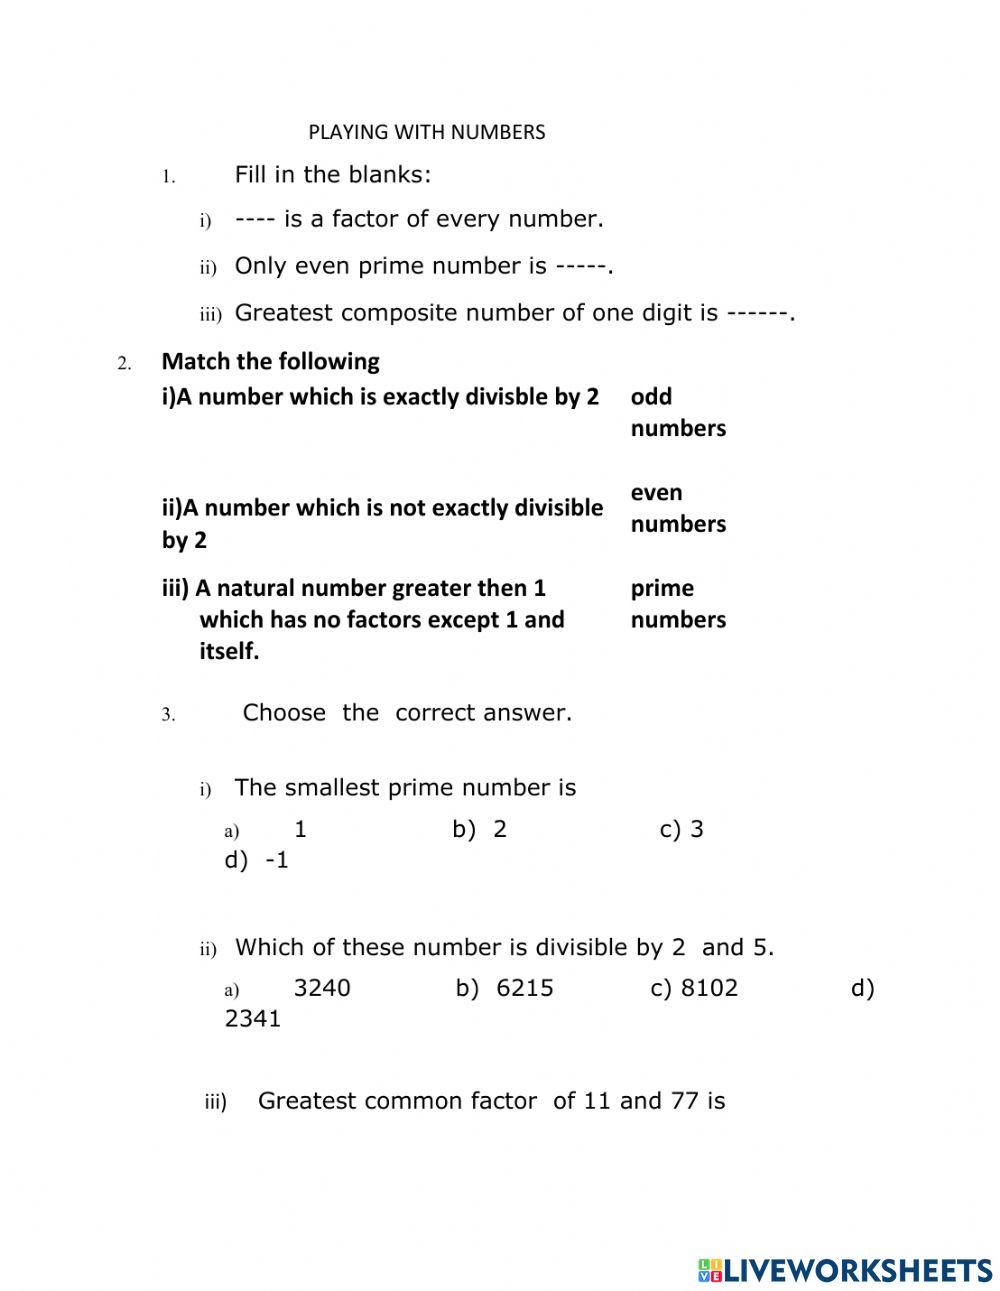 Worksheet (playing with numbers)